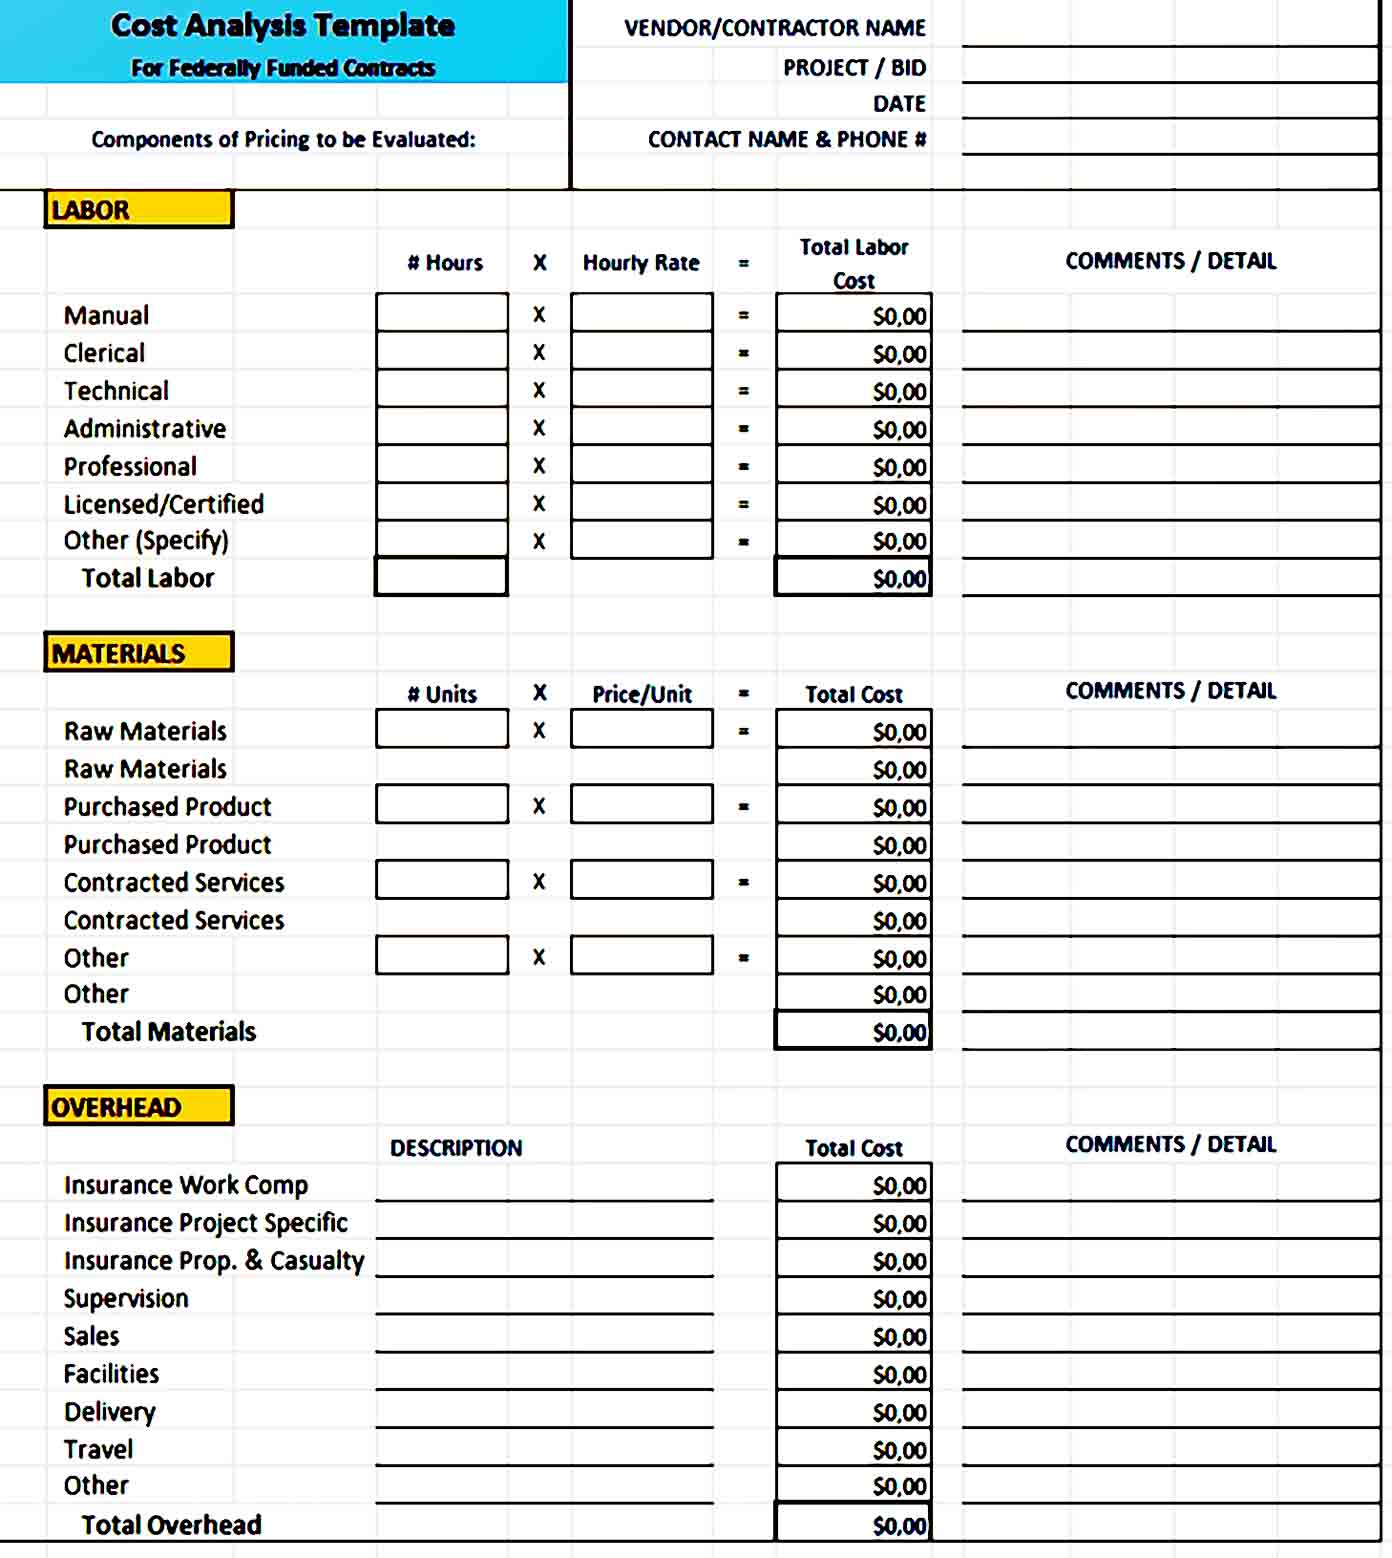 Cost Benefit Analysis Template 06